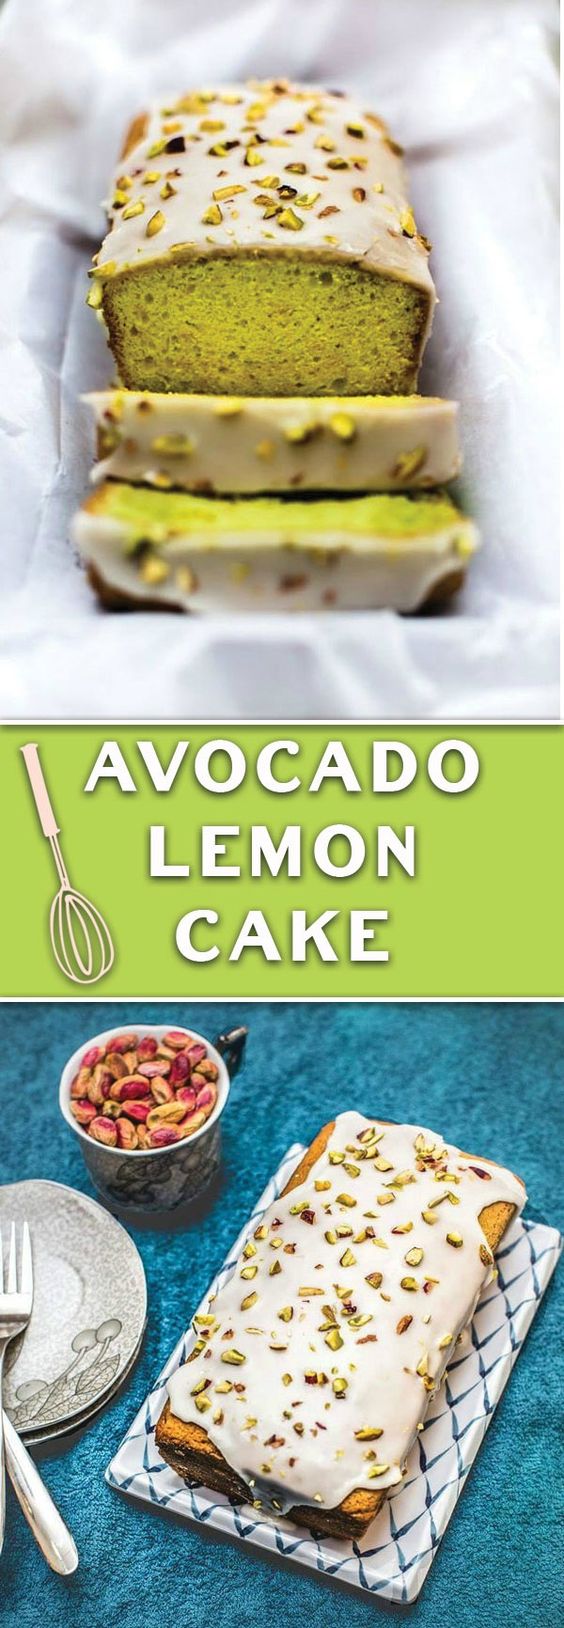 Avocado lemon cake. Healthy snack option with no oil or butter needed. A simple and easy to make healthy snack option. | Discover awesome ways to prepare homemade healthy snacks for weight loss . Find great ways to create healthy snack recipes. #healthyrecipes #healthyeating #healthylifestyle #mealprep #healthyliving